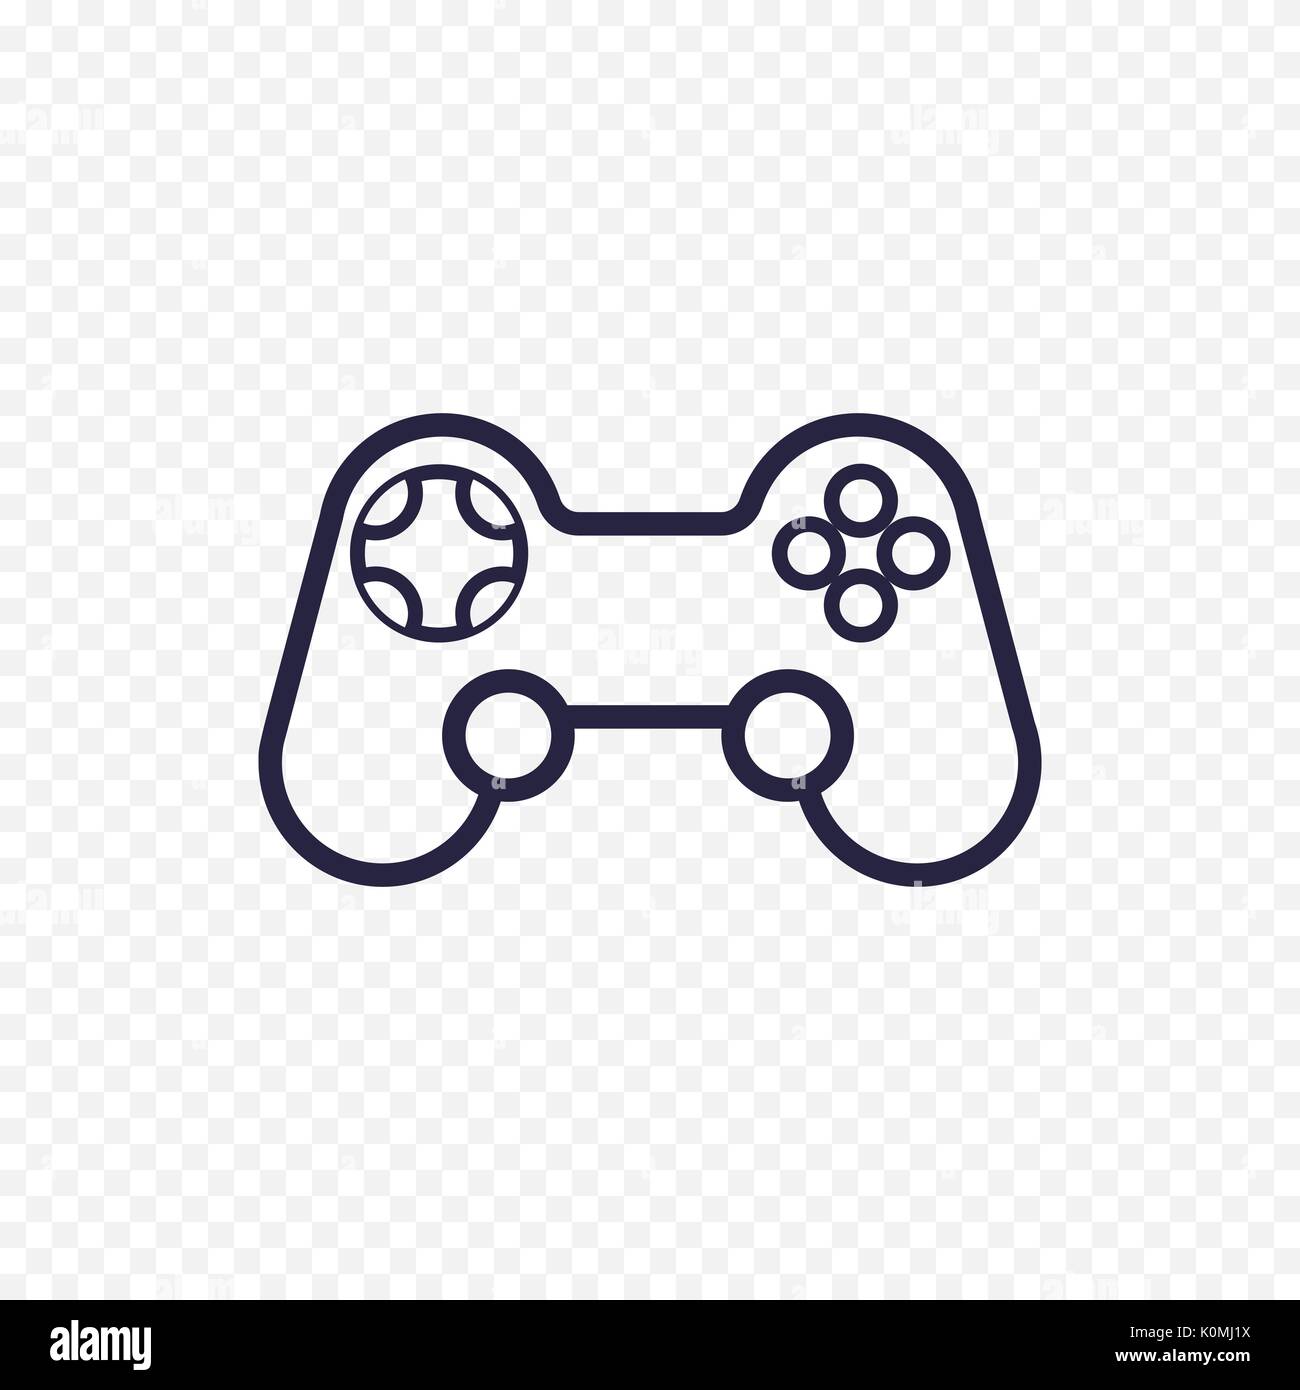 Game controller line icon. Gamepad thin linear signs for video computer game. Outline concept for websites, infographic, mobile app. Stock Vector